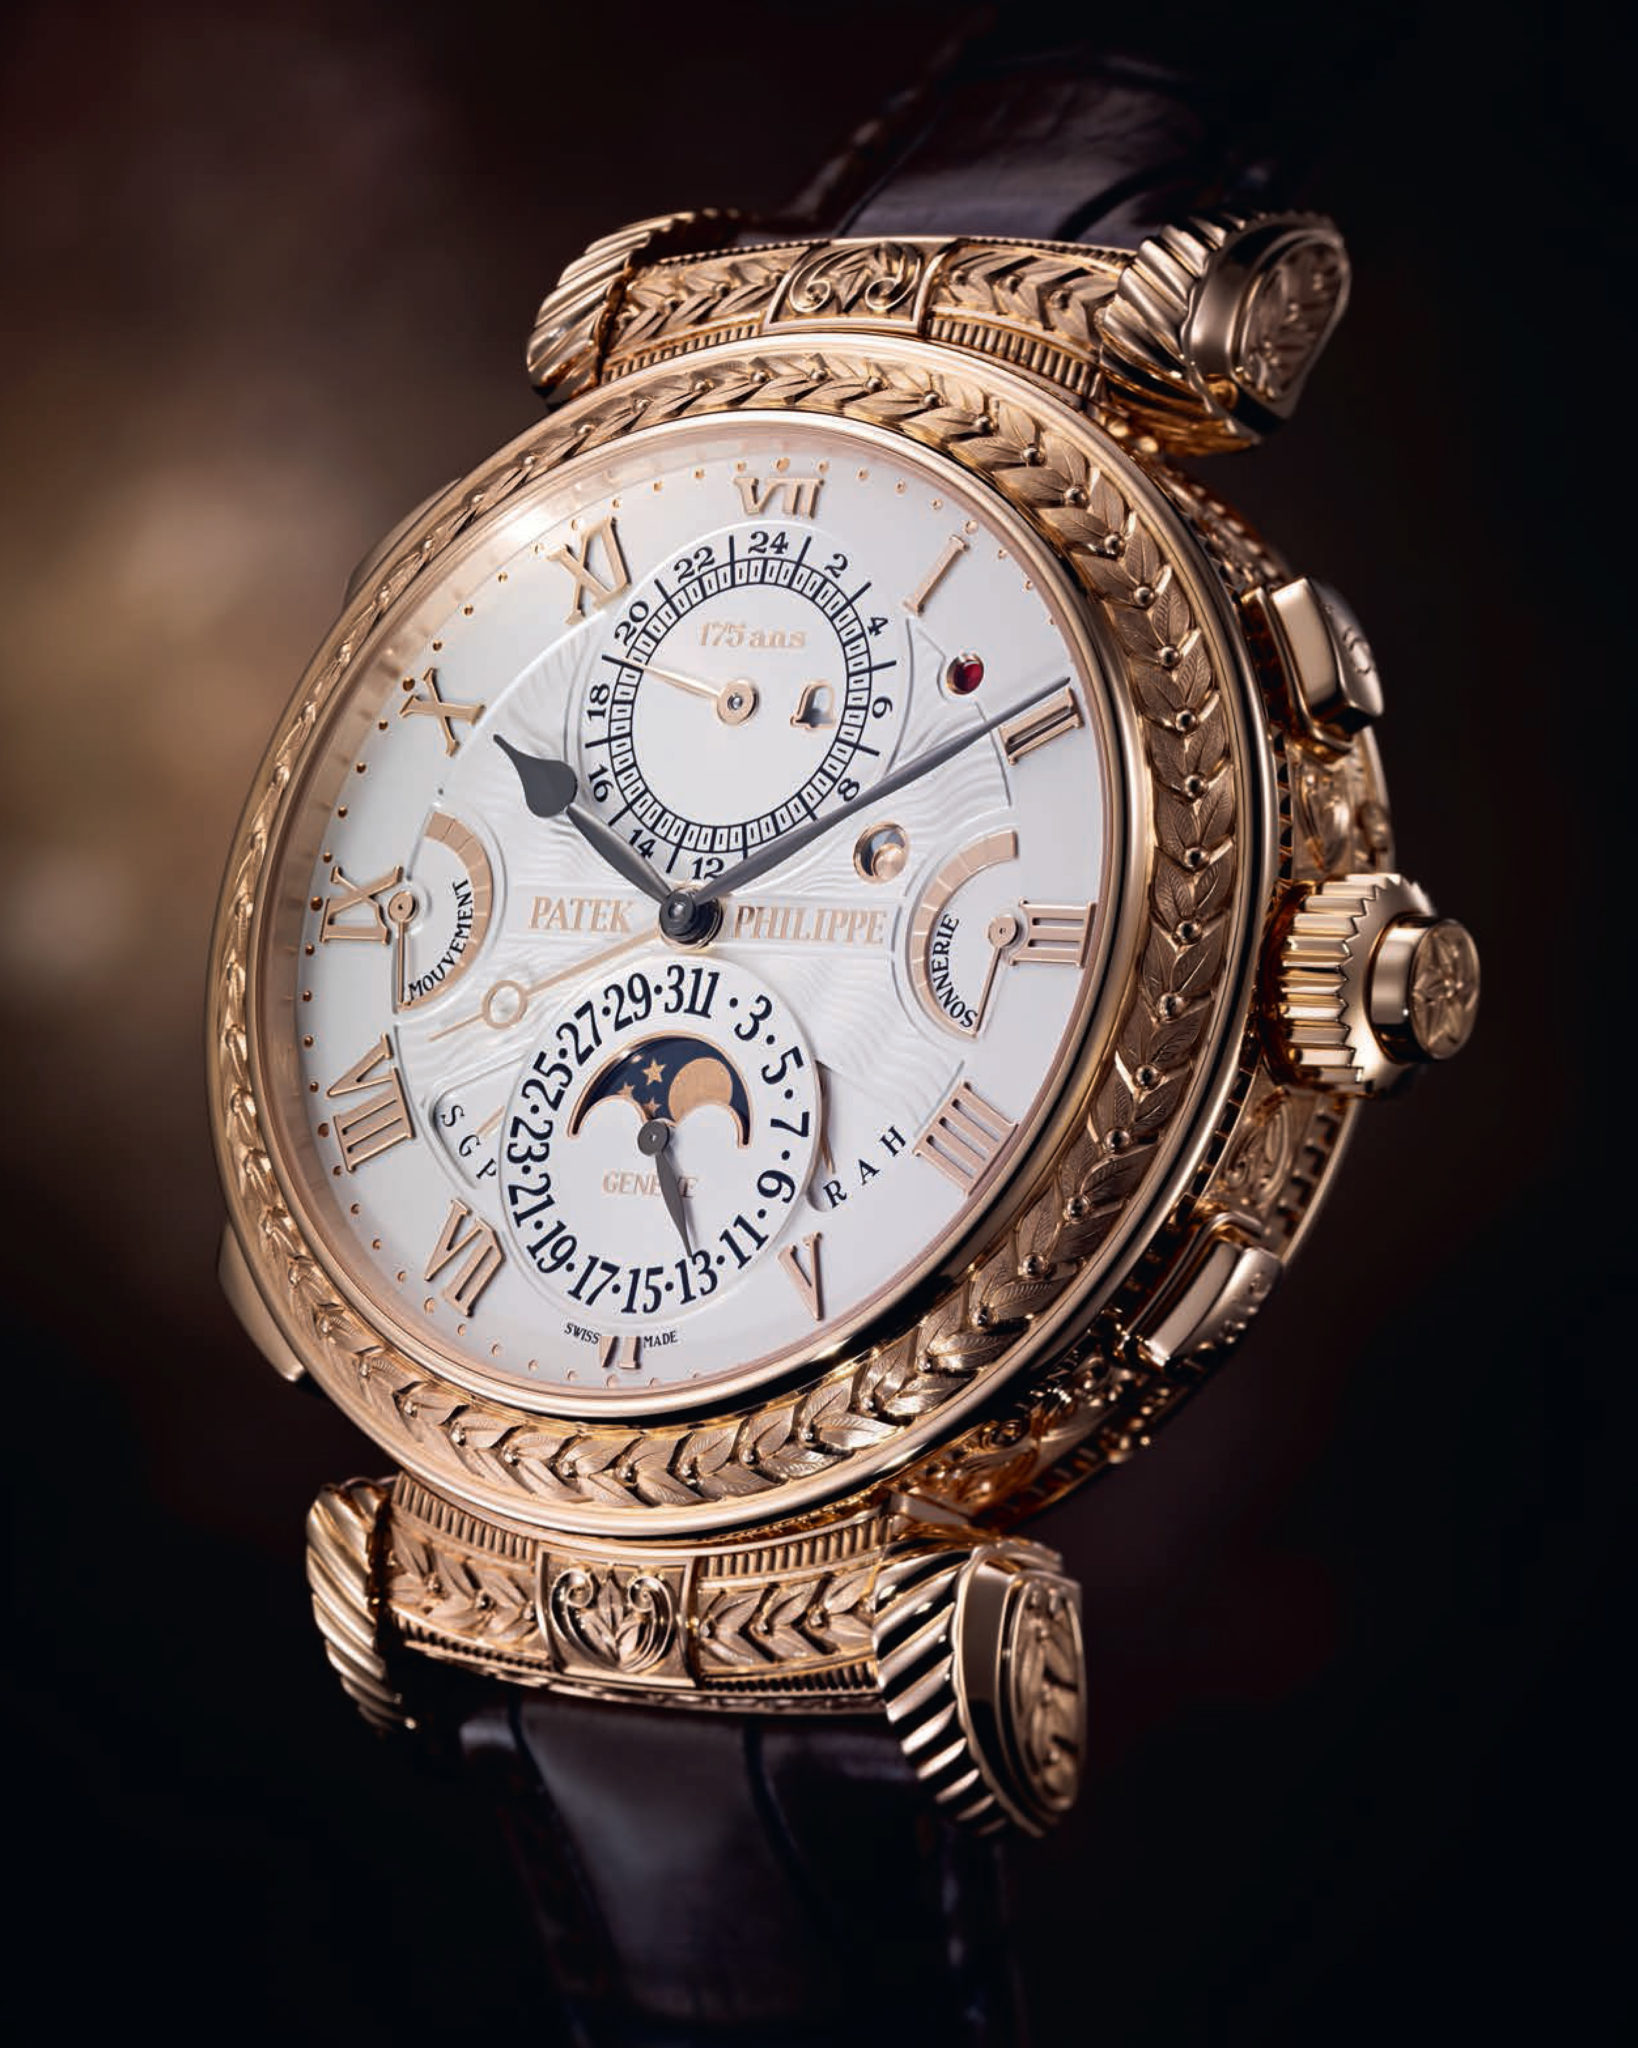 This $31M Patek Philippe Is Now the Most Expensive Watch in the World –  Robb Report